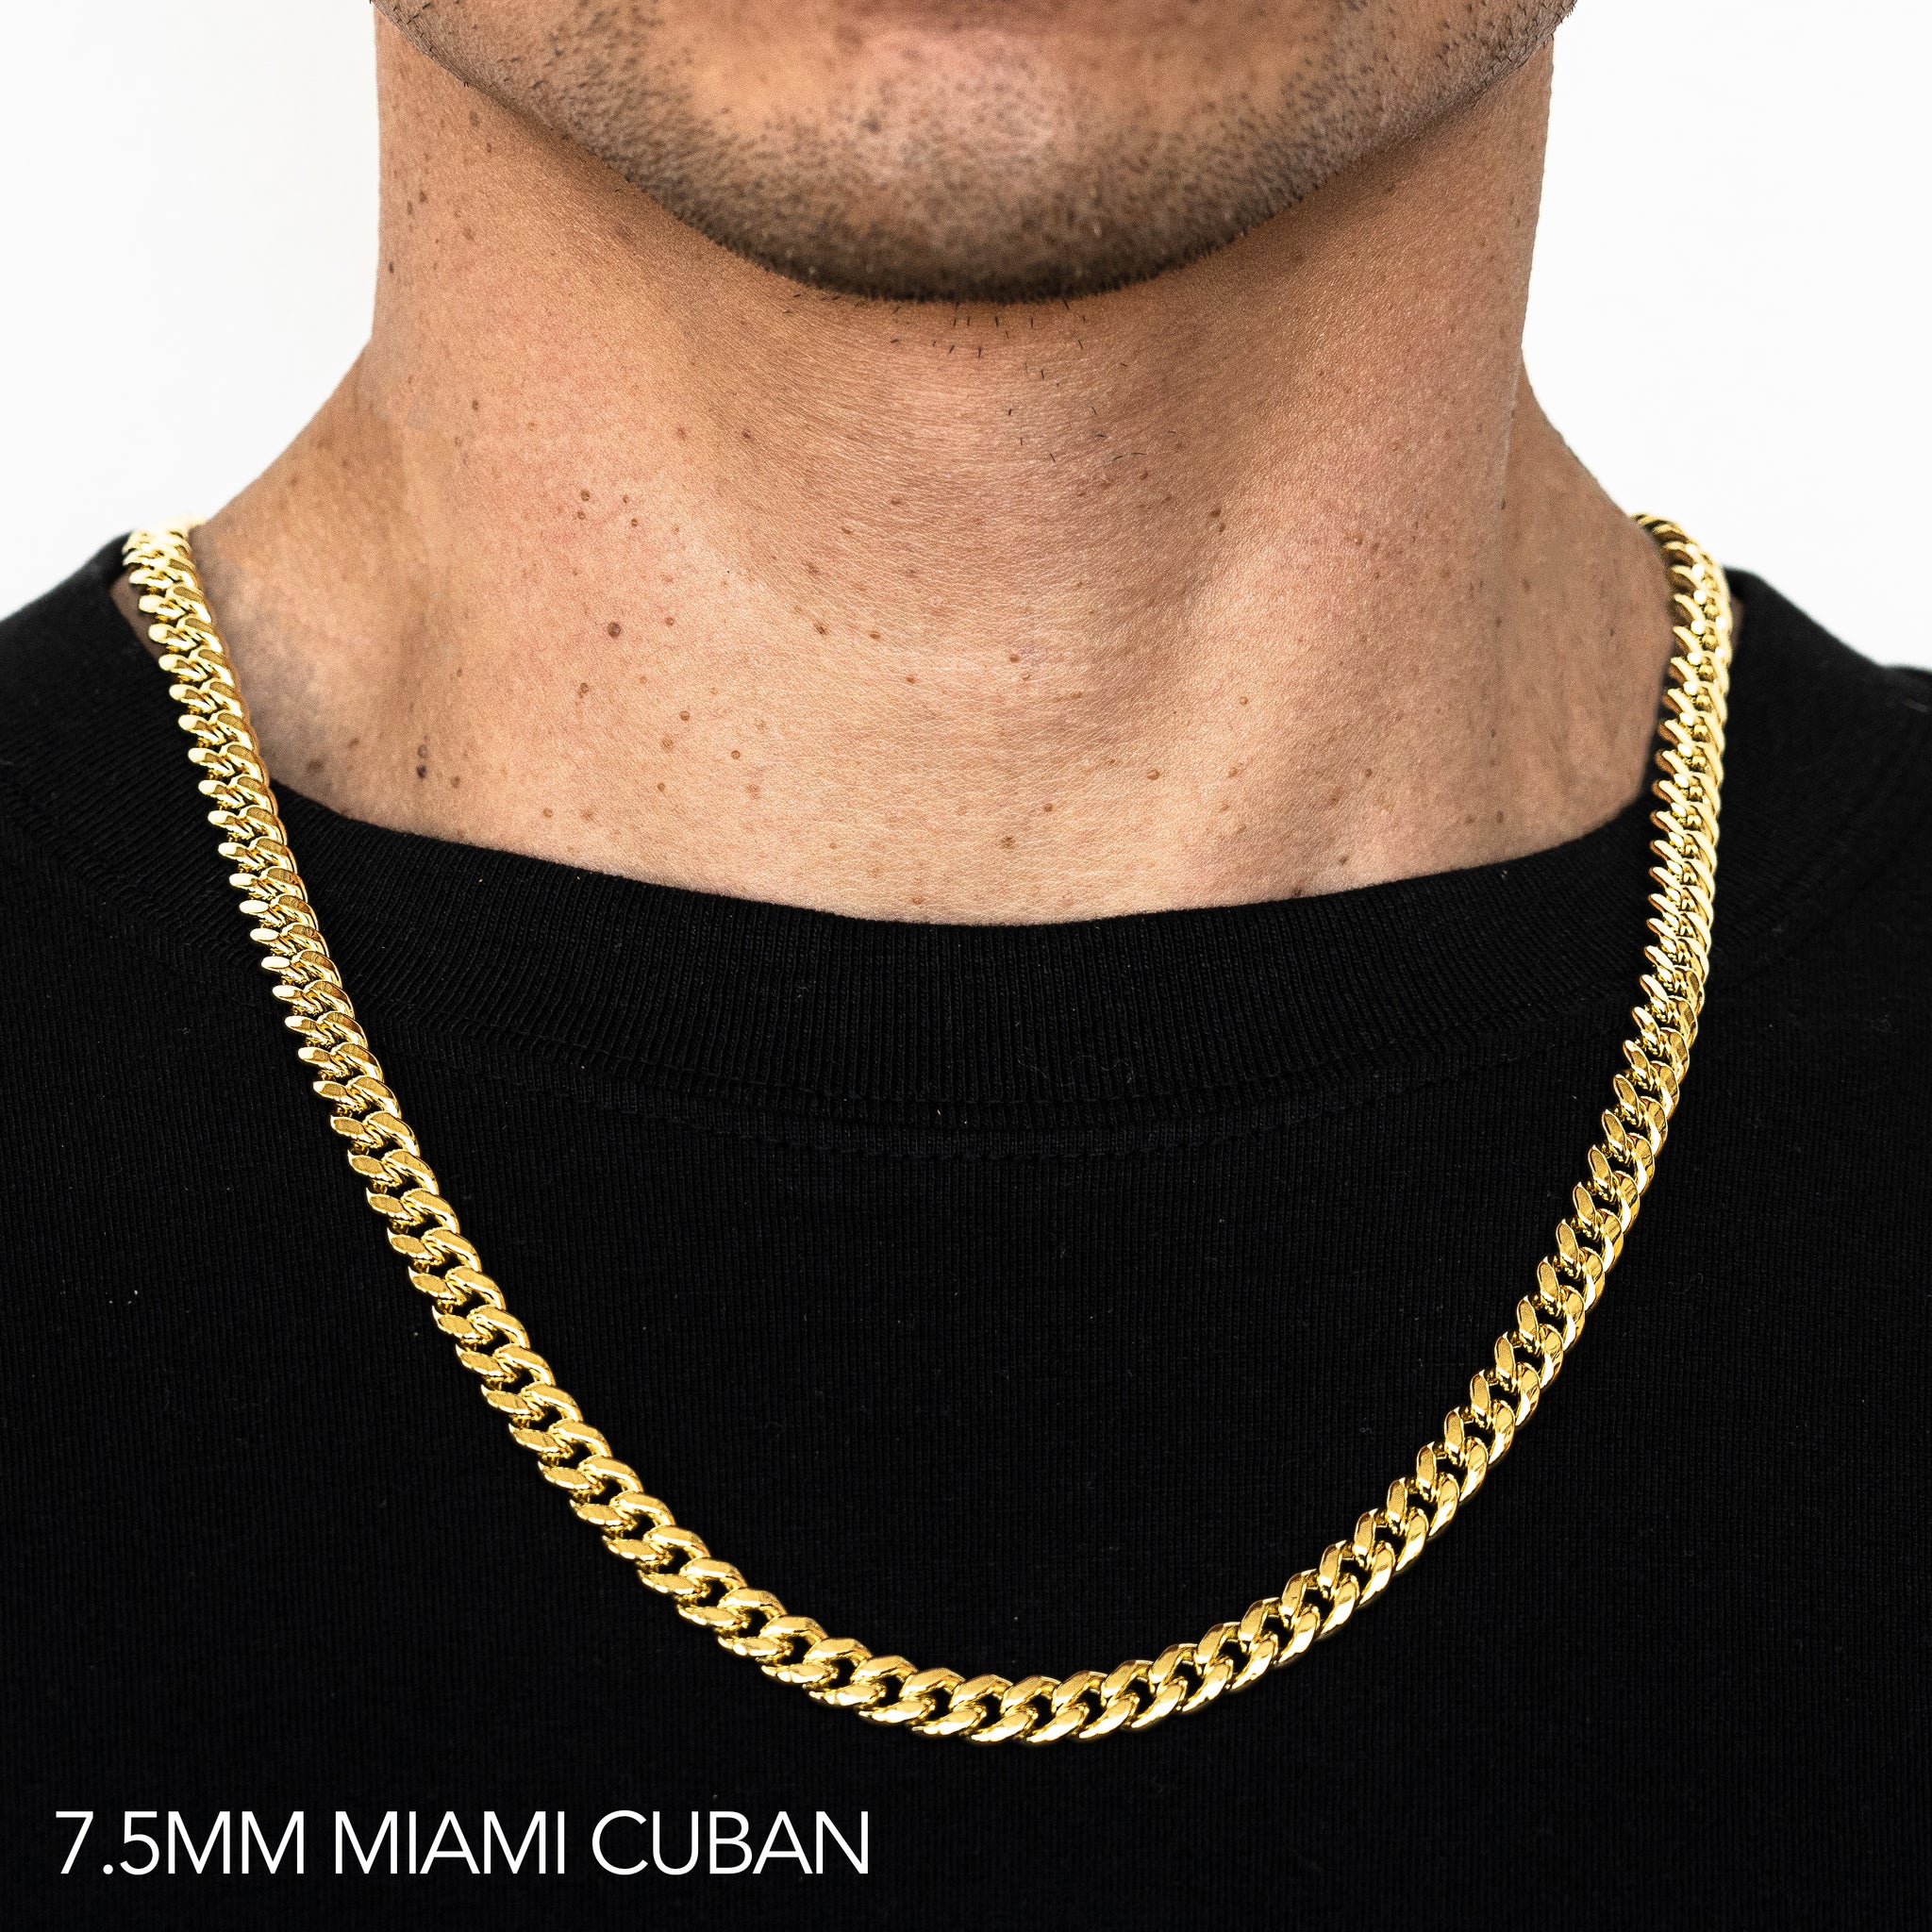 14K 7.5MM YELLOW GOLD HOLLOW MIAMI CUBAN 18 CHAIN NECKLACE"